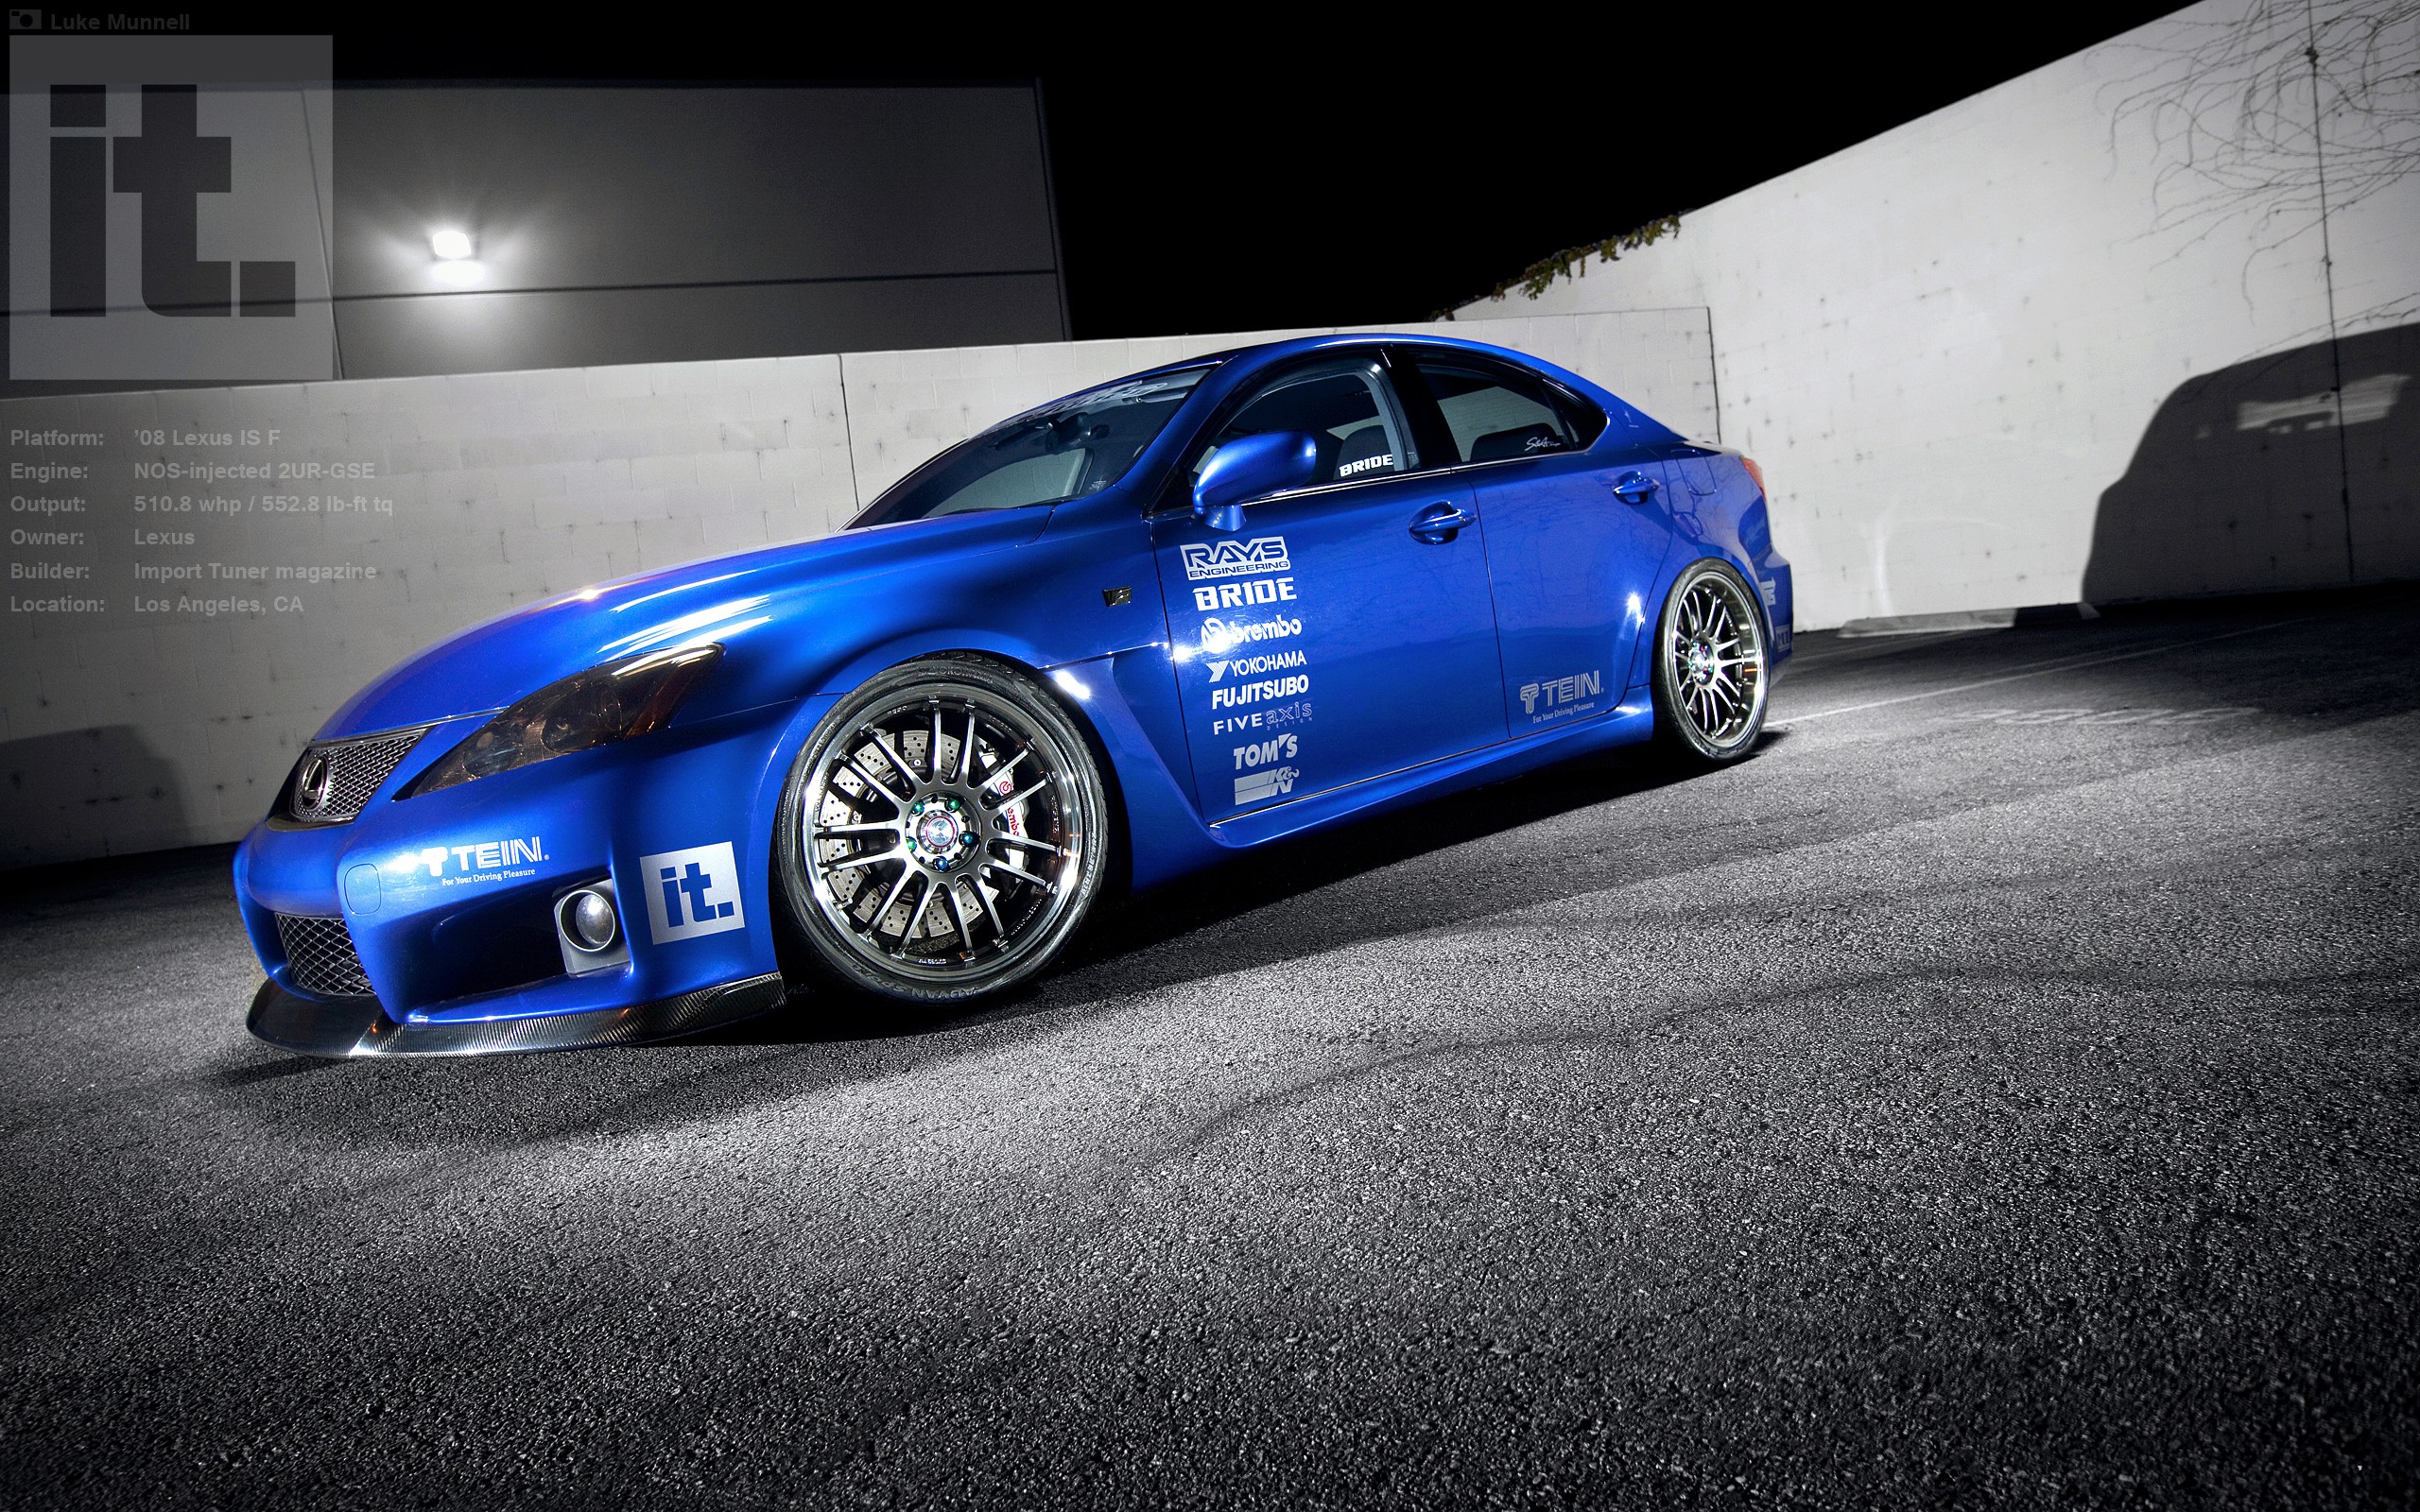 Automobile Wallpapers, Car Images, Hd Car Photos, Tuning, - Import Tuner Blue Car , HD Wallpaper & Backgrounds